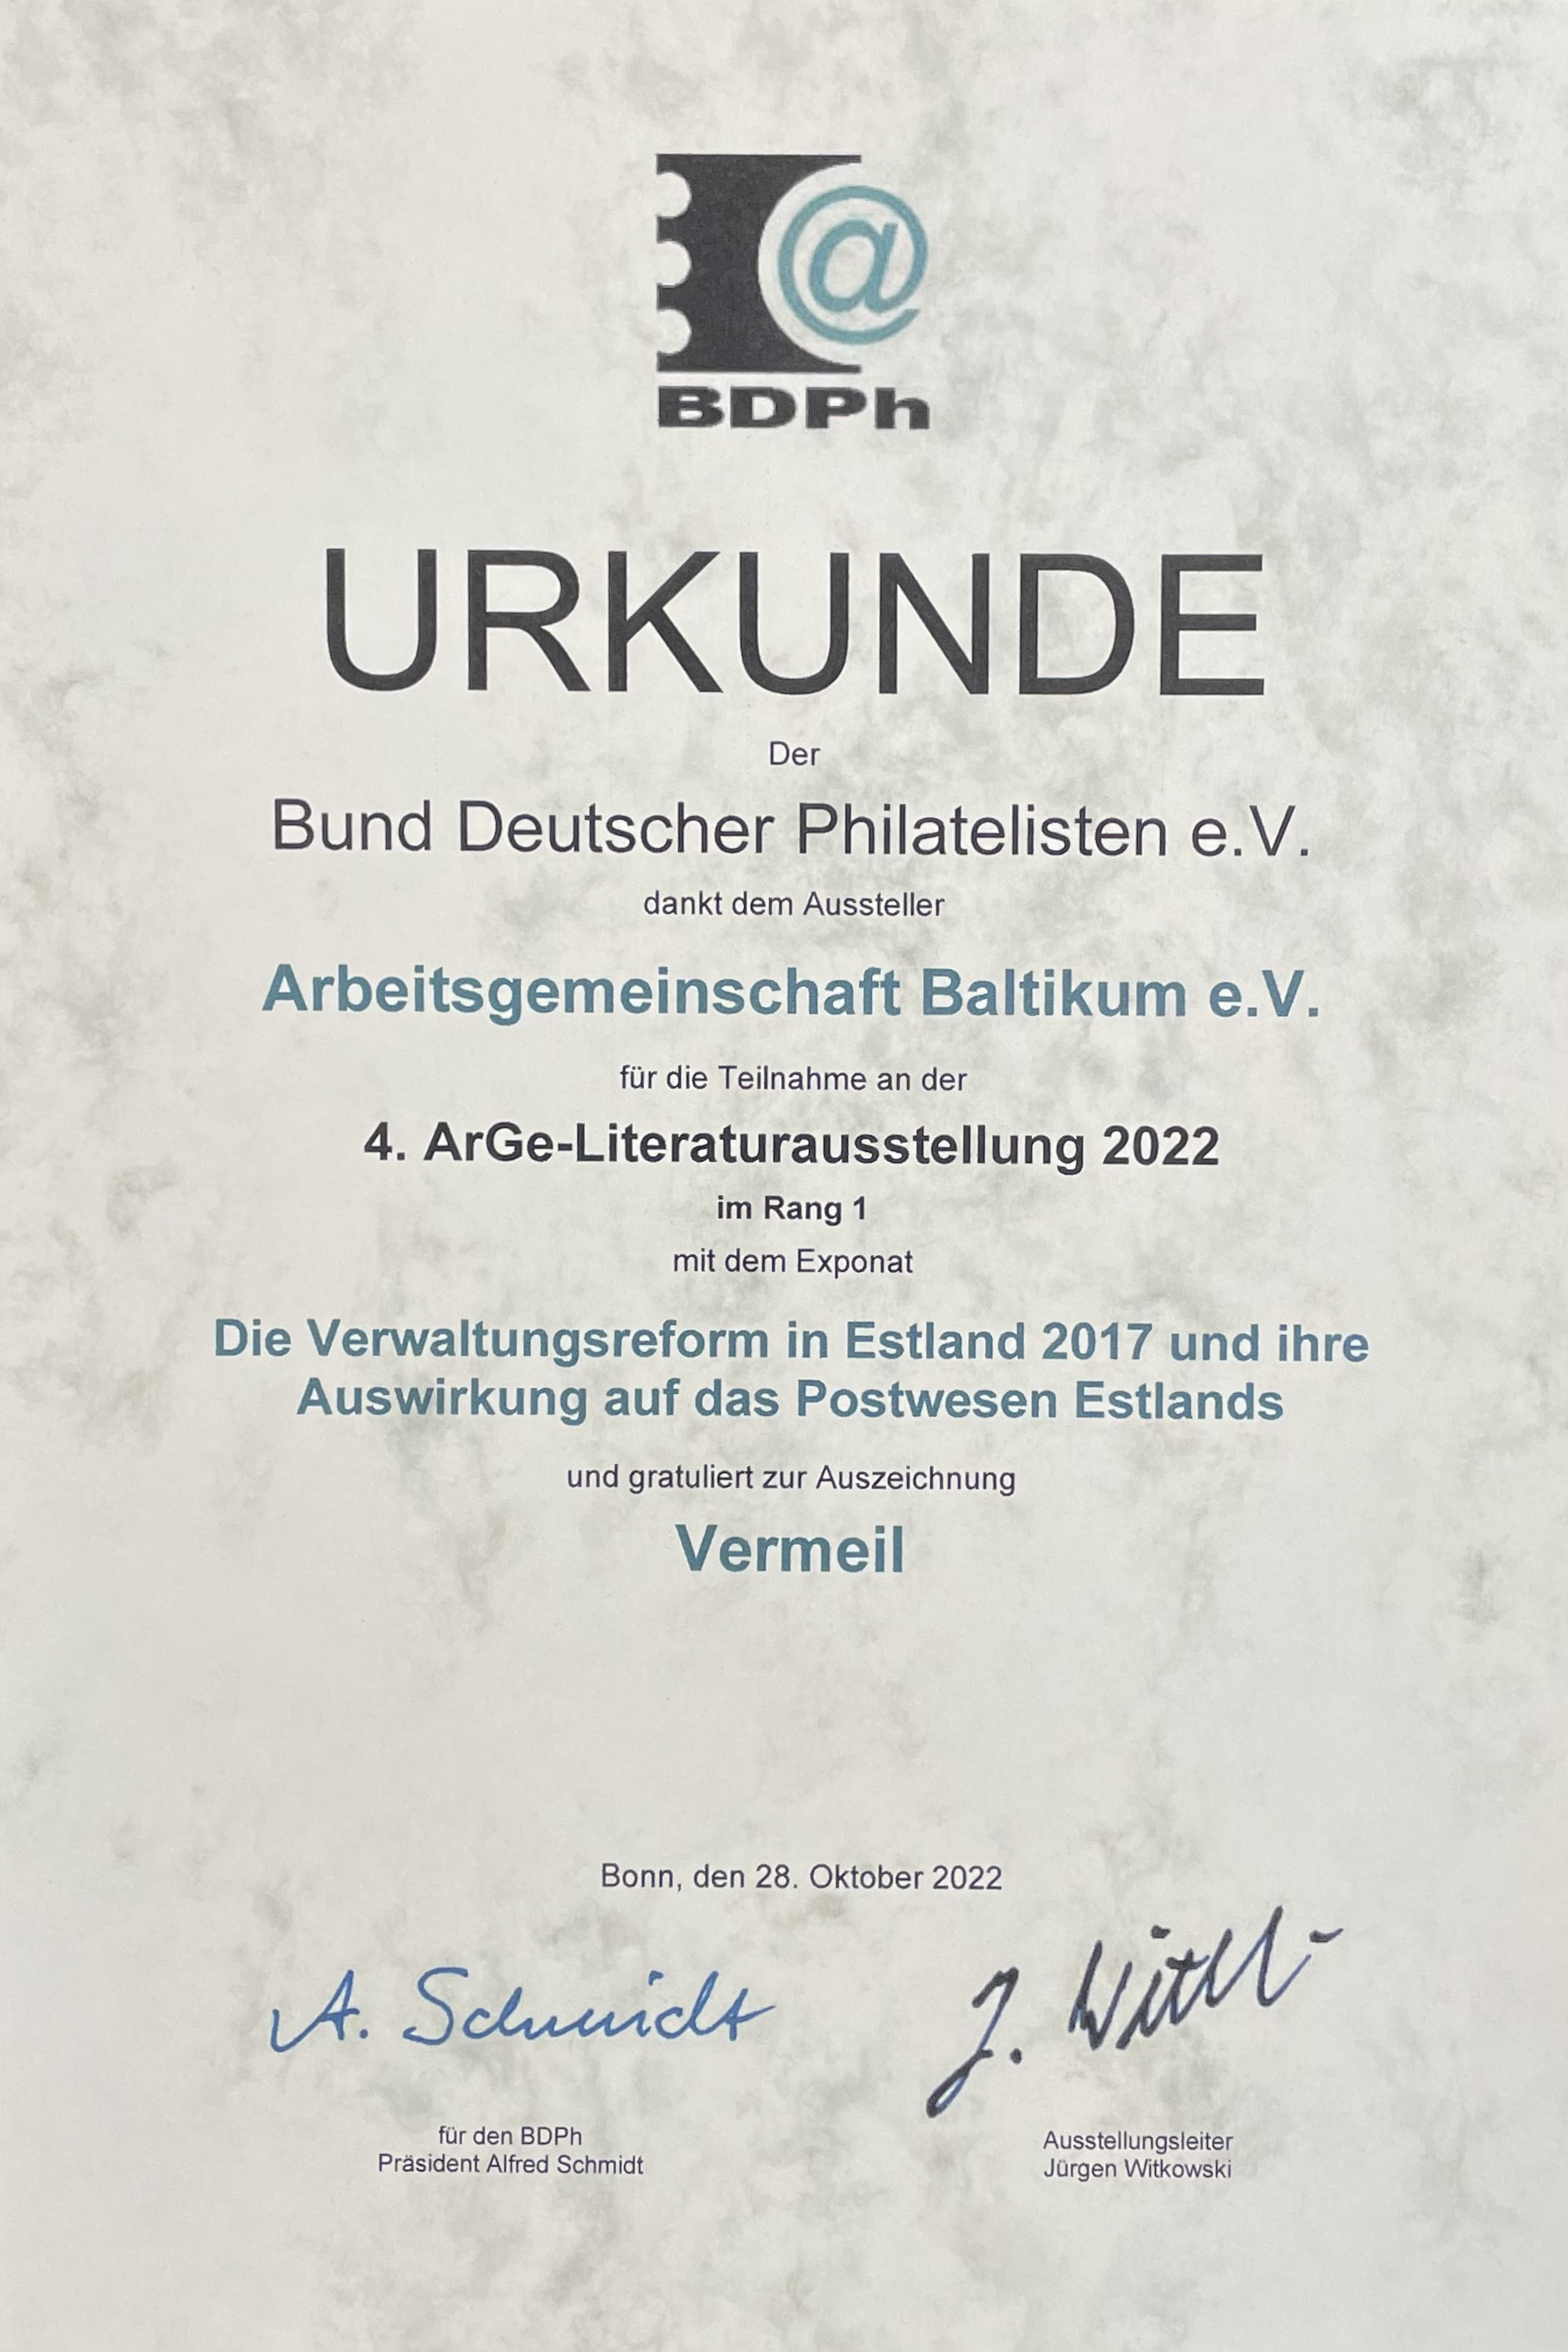 4th ArGe literature exhibition of the BDPh 2022: Vermeil (75 p.) for working guide no. 1